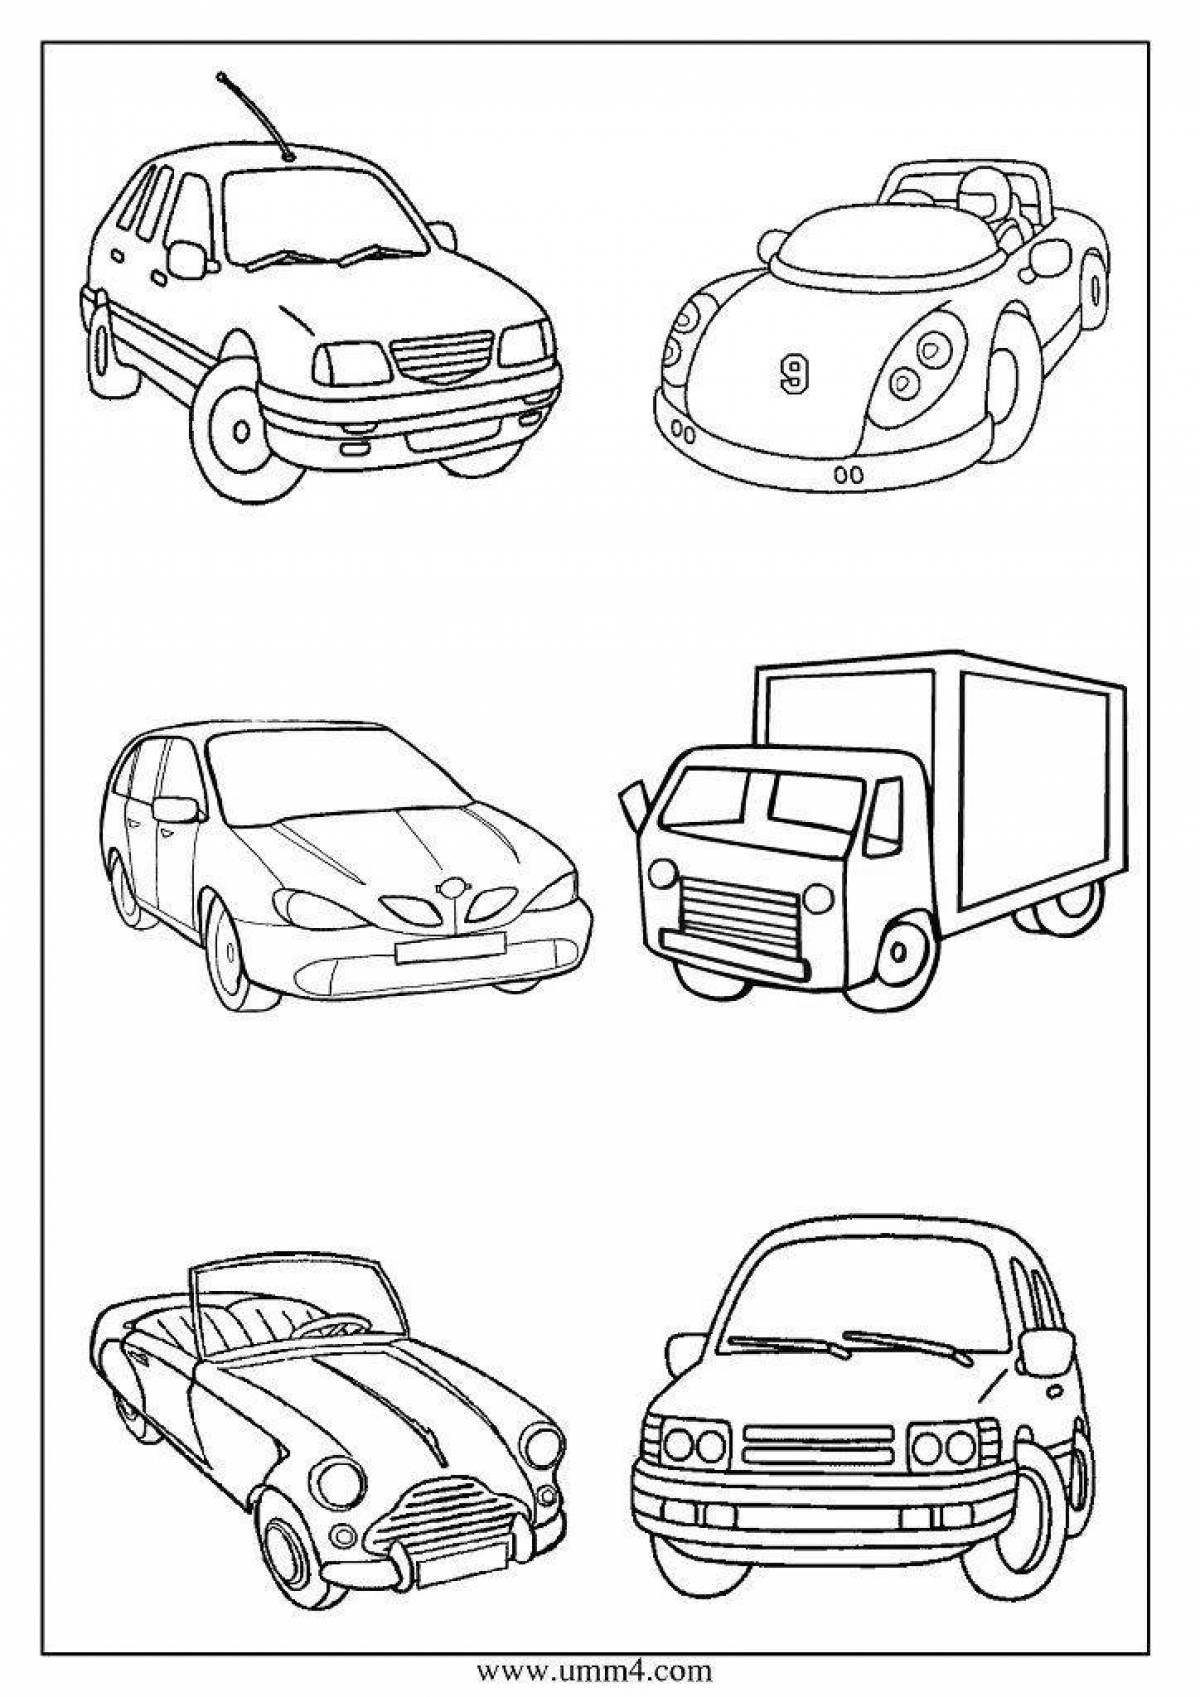 Coloring dazzling cars